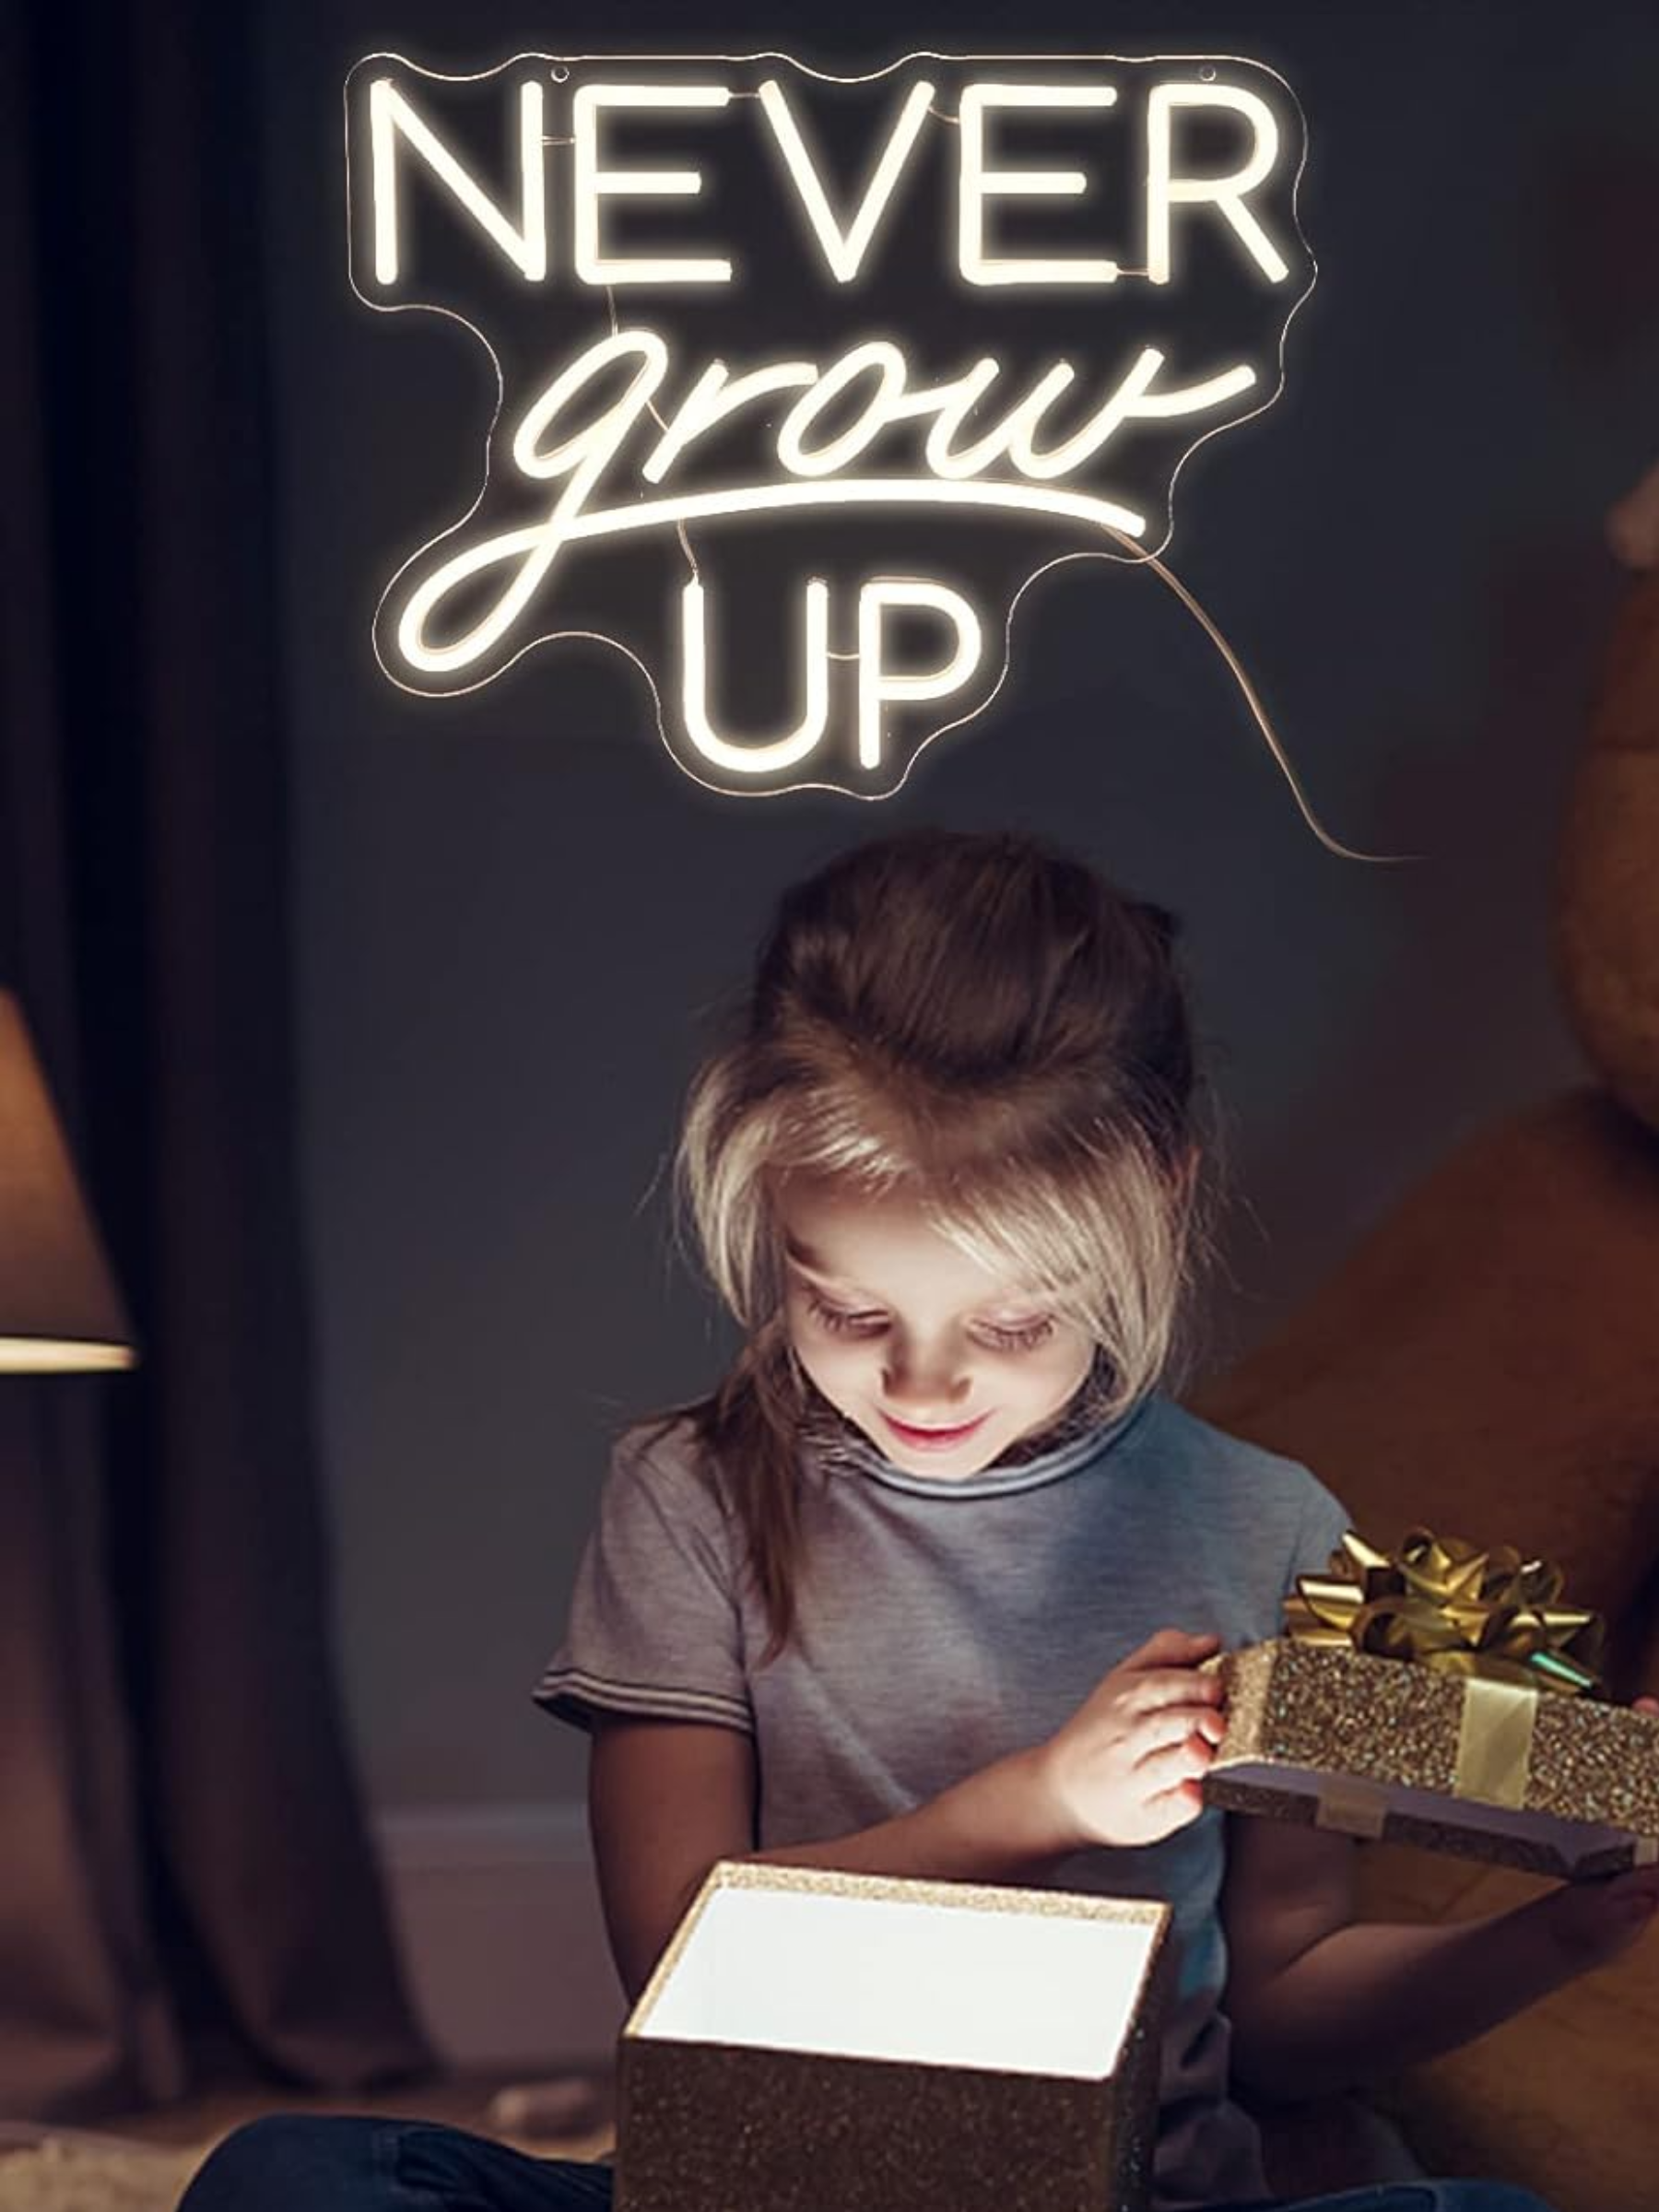 Put your sentiments in lights with a bright but dimmable Never Grow Up neon sign. $23, Amazon. <a href="https://www.amazon.com/dp/B0C34BJGK9?">Get it now!</a><p>Sign up for today’s biggest stories, from pop culture to politics.</p><a href="https://www.glamour.com/newsletter/news?sourceCode=msnsend">Sign Up</a>